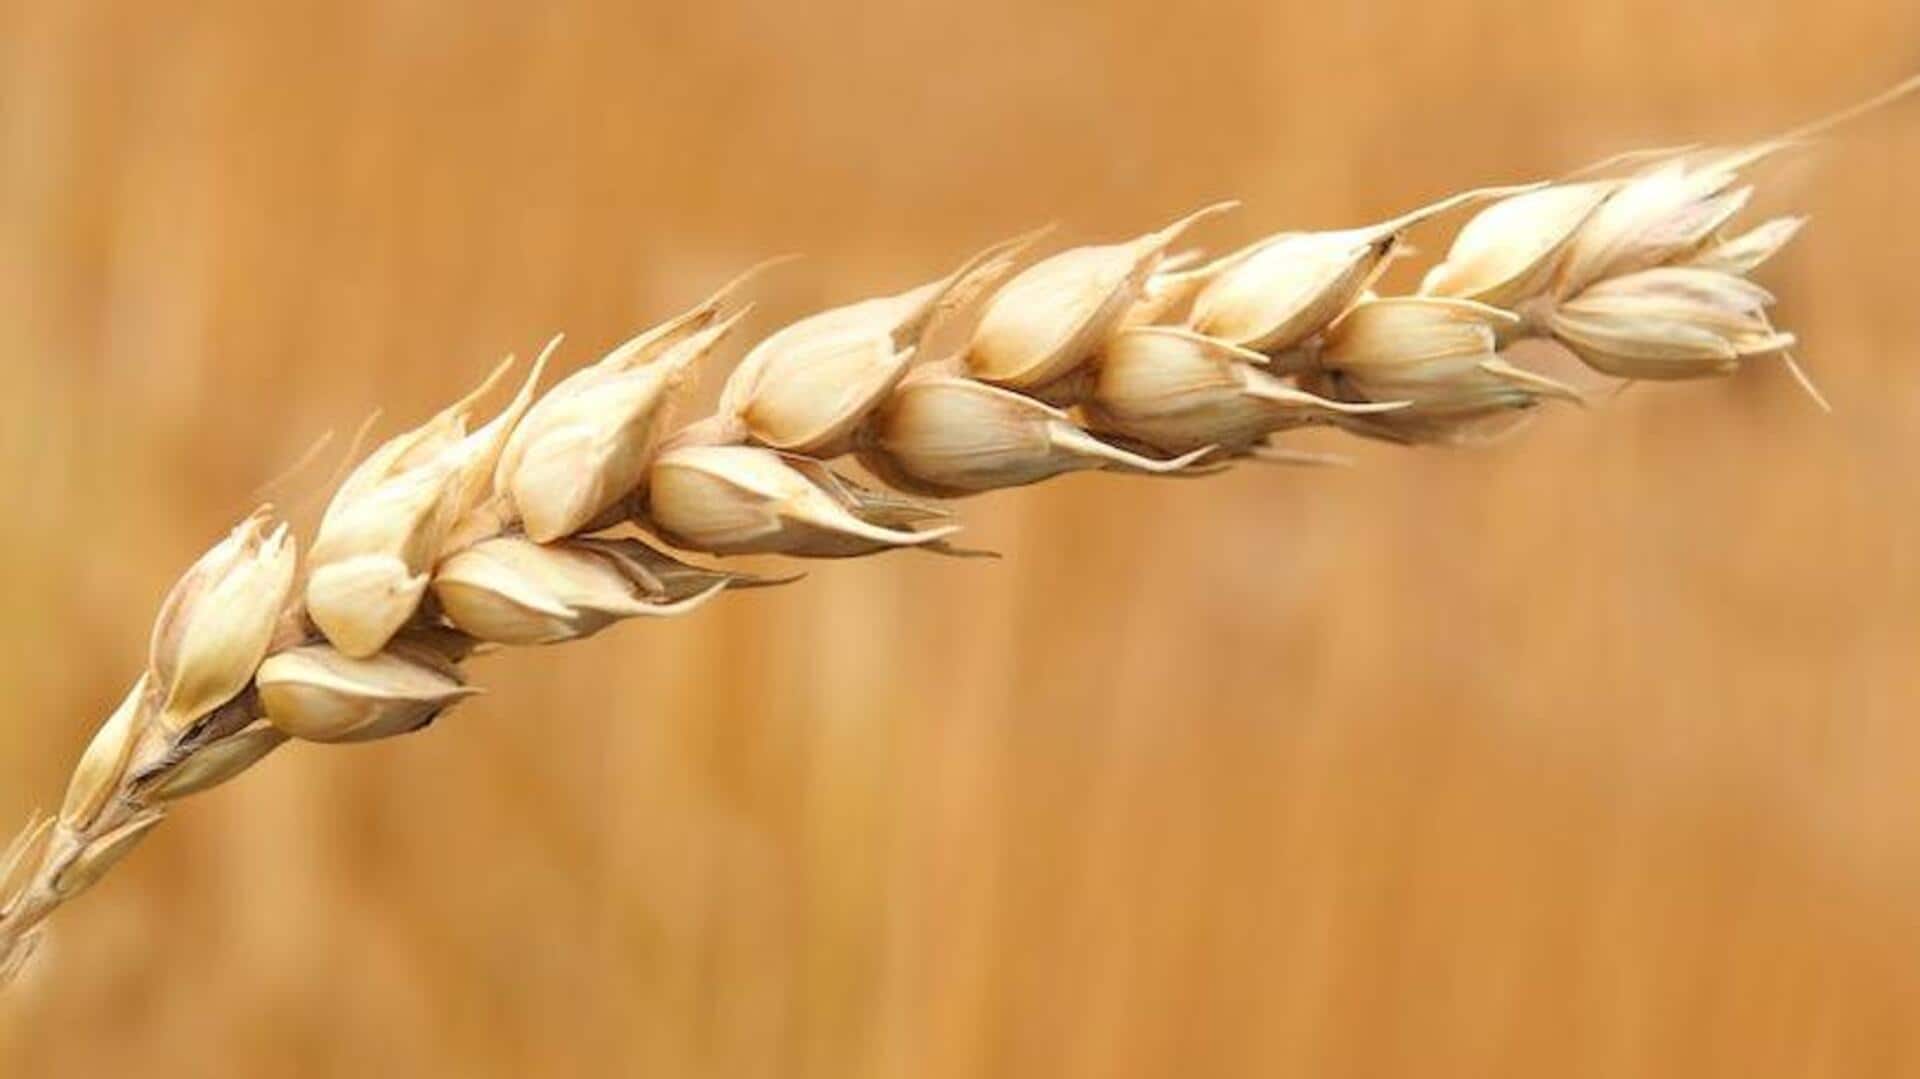 Wheat, wheat bran, wheat germ: Differences, benefits, and applications